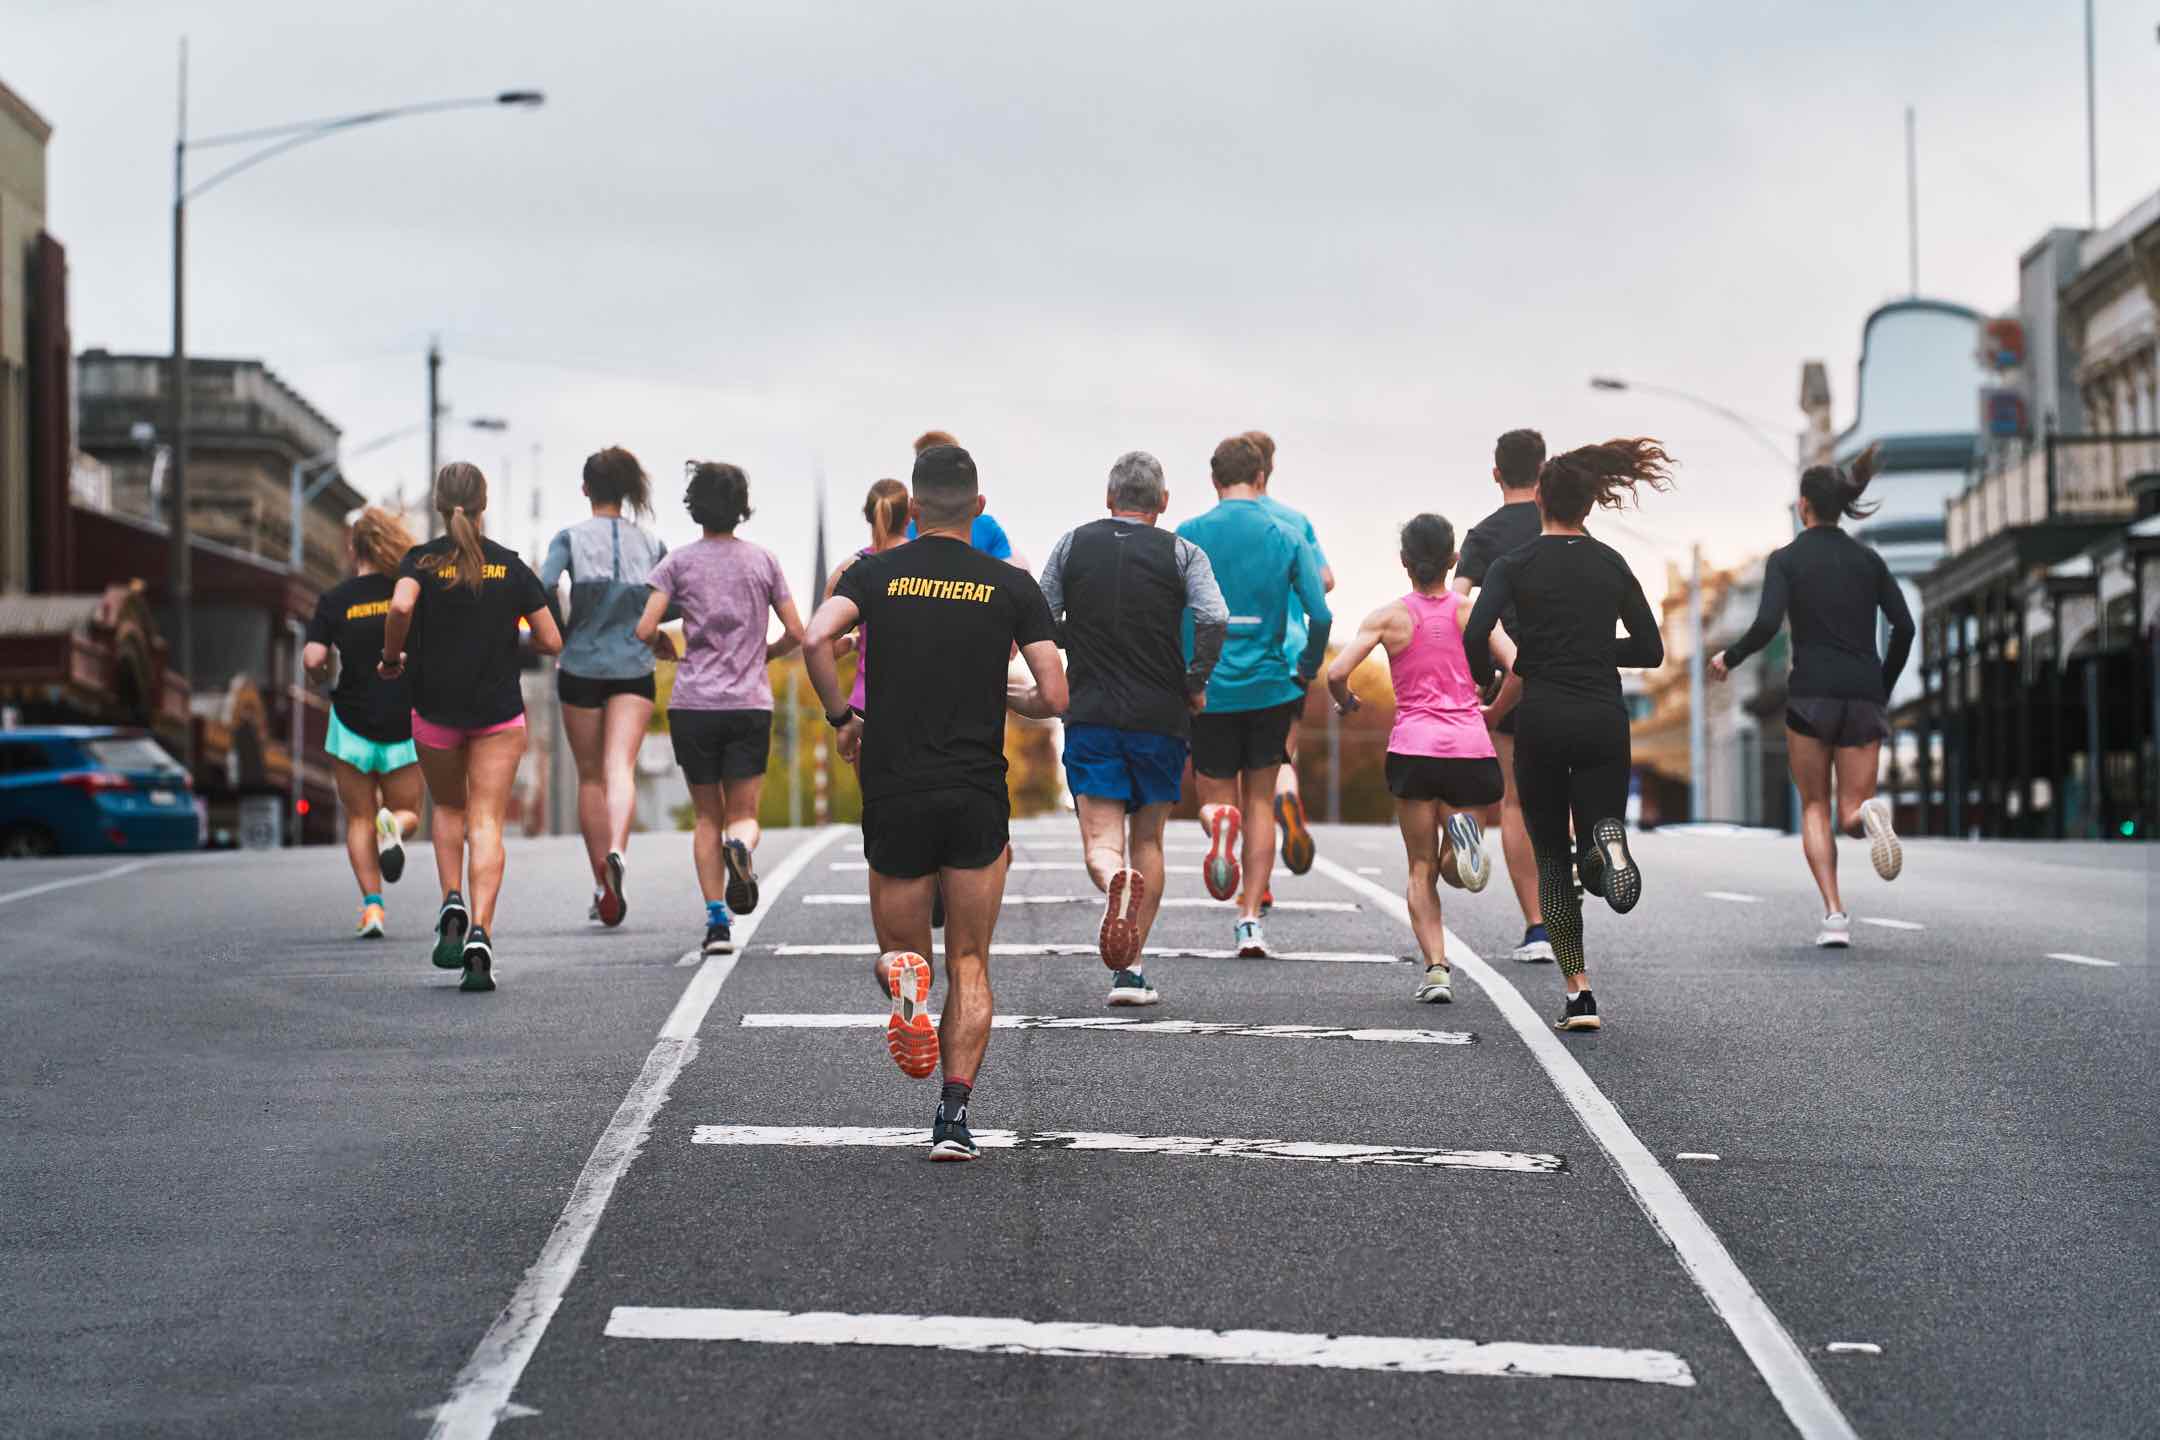 A new world class running festival is coming to Ballarat in April